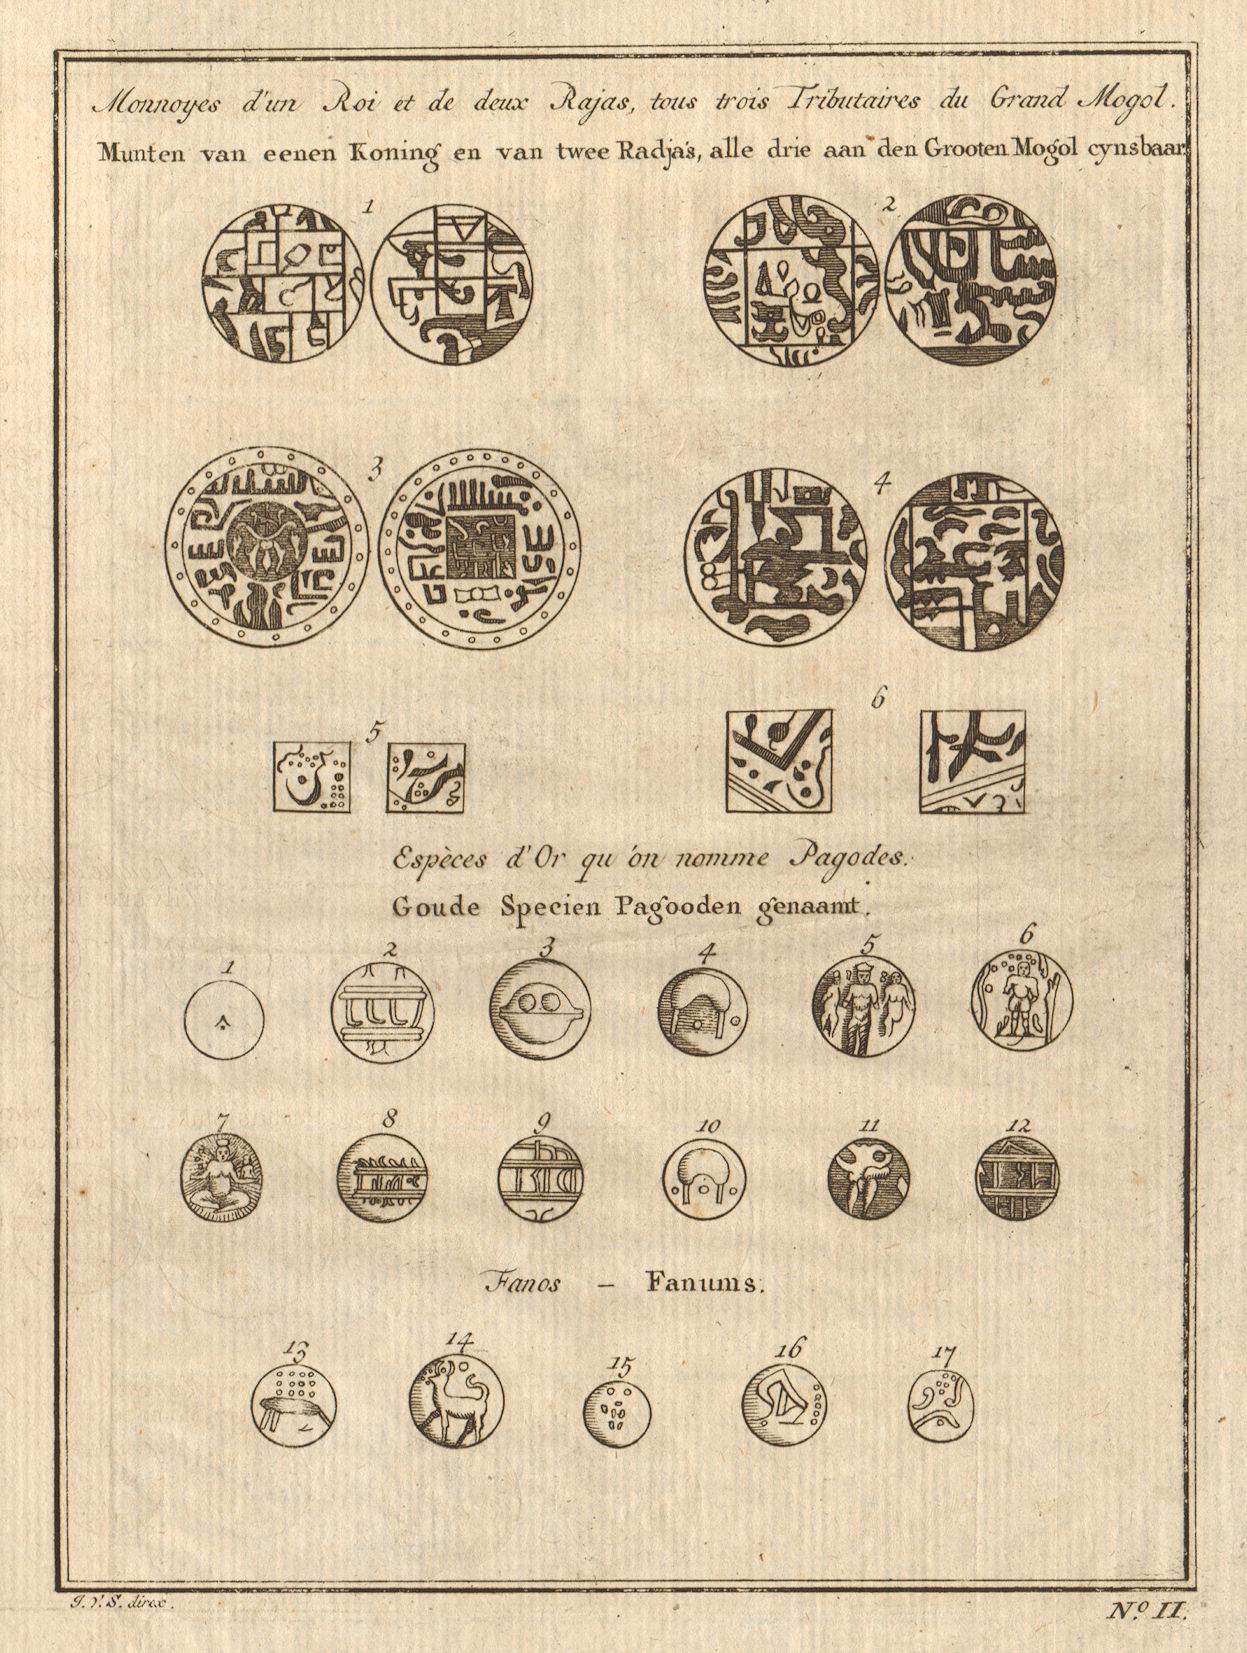 Associate Product Coins of a King and two Rajas, all tributaries of the Great Mogul. SCHLEY 1755